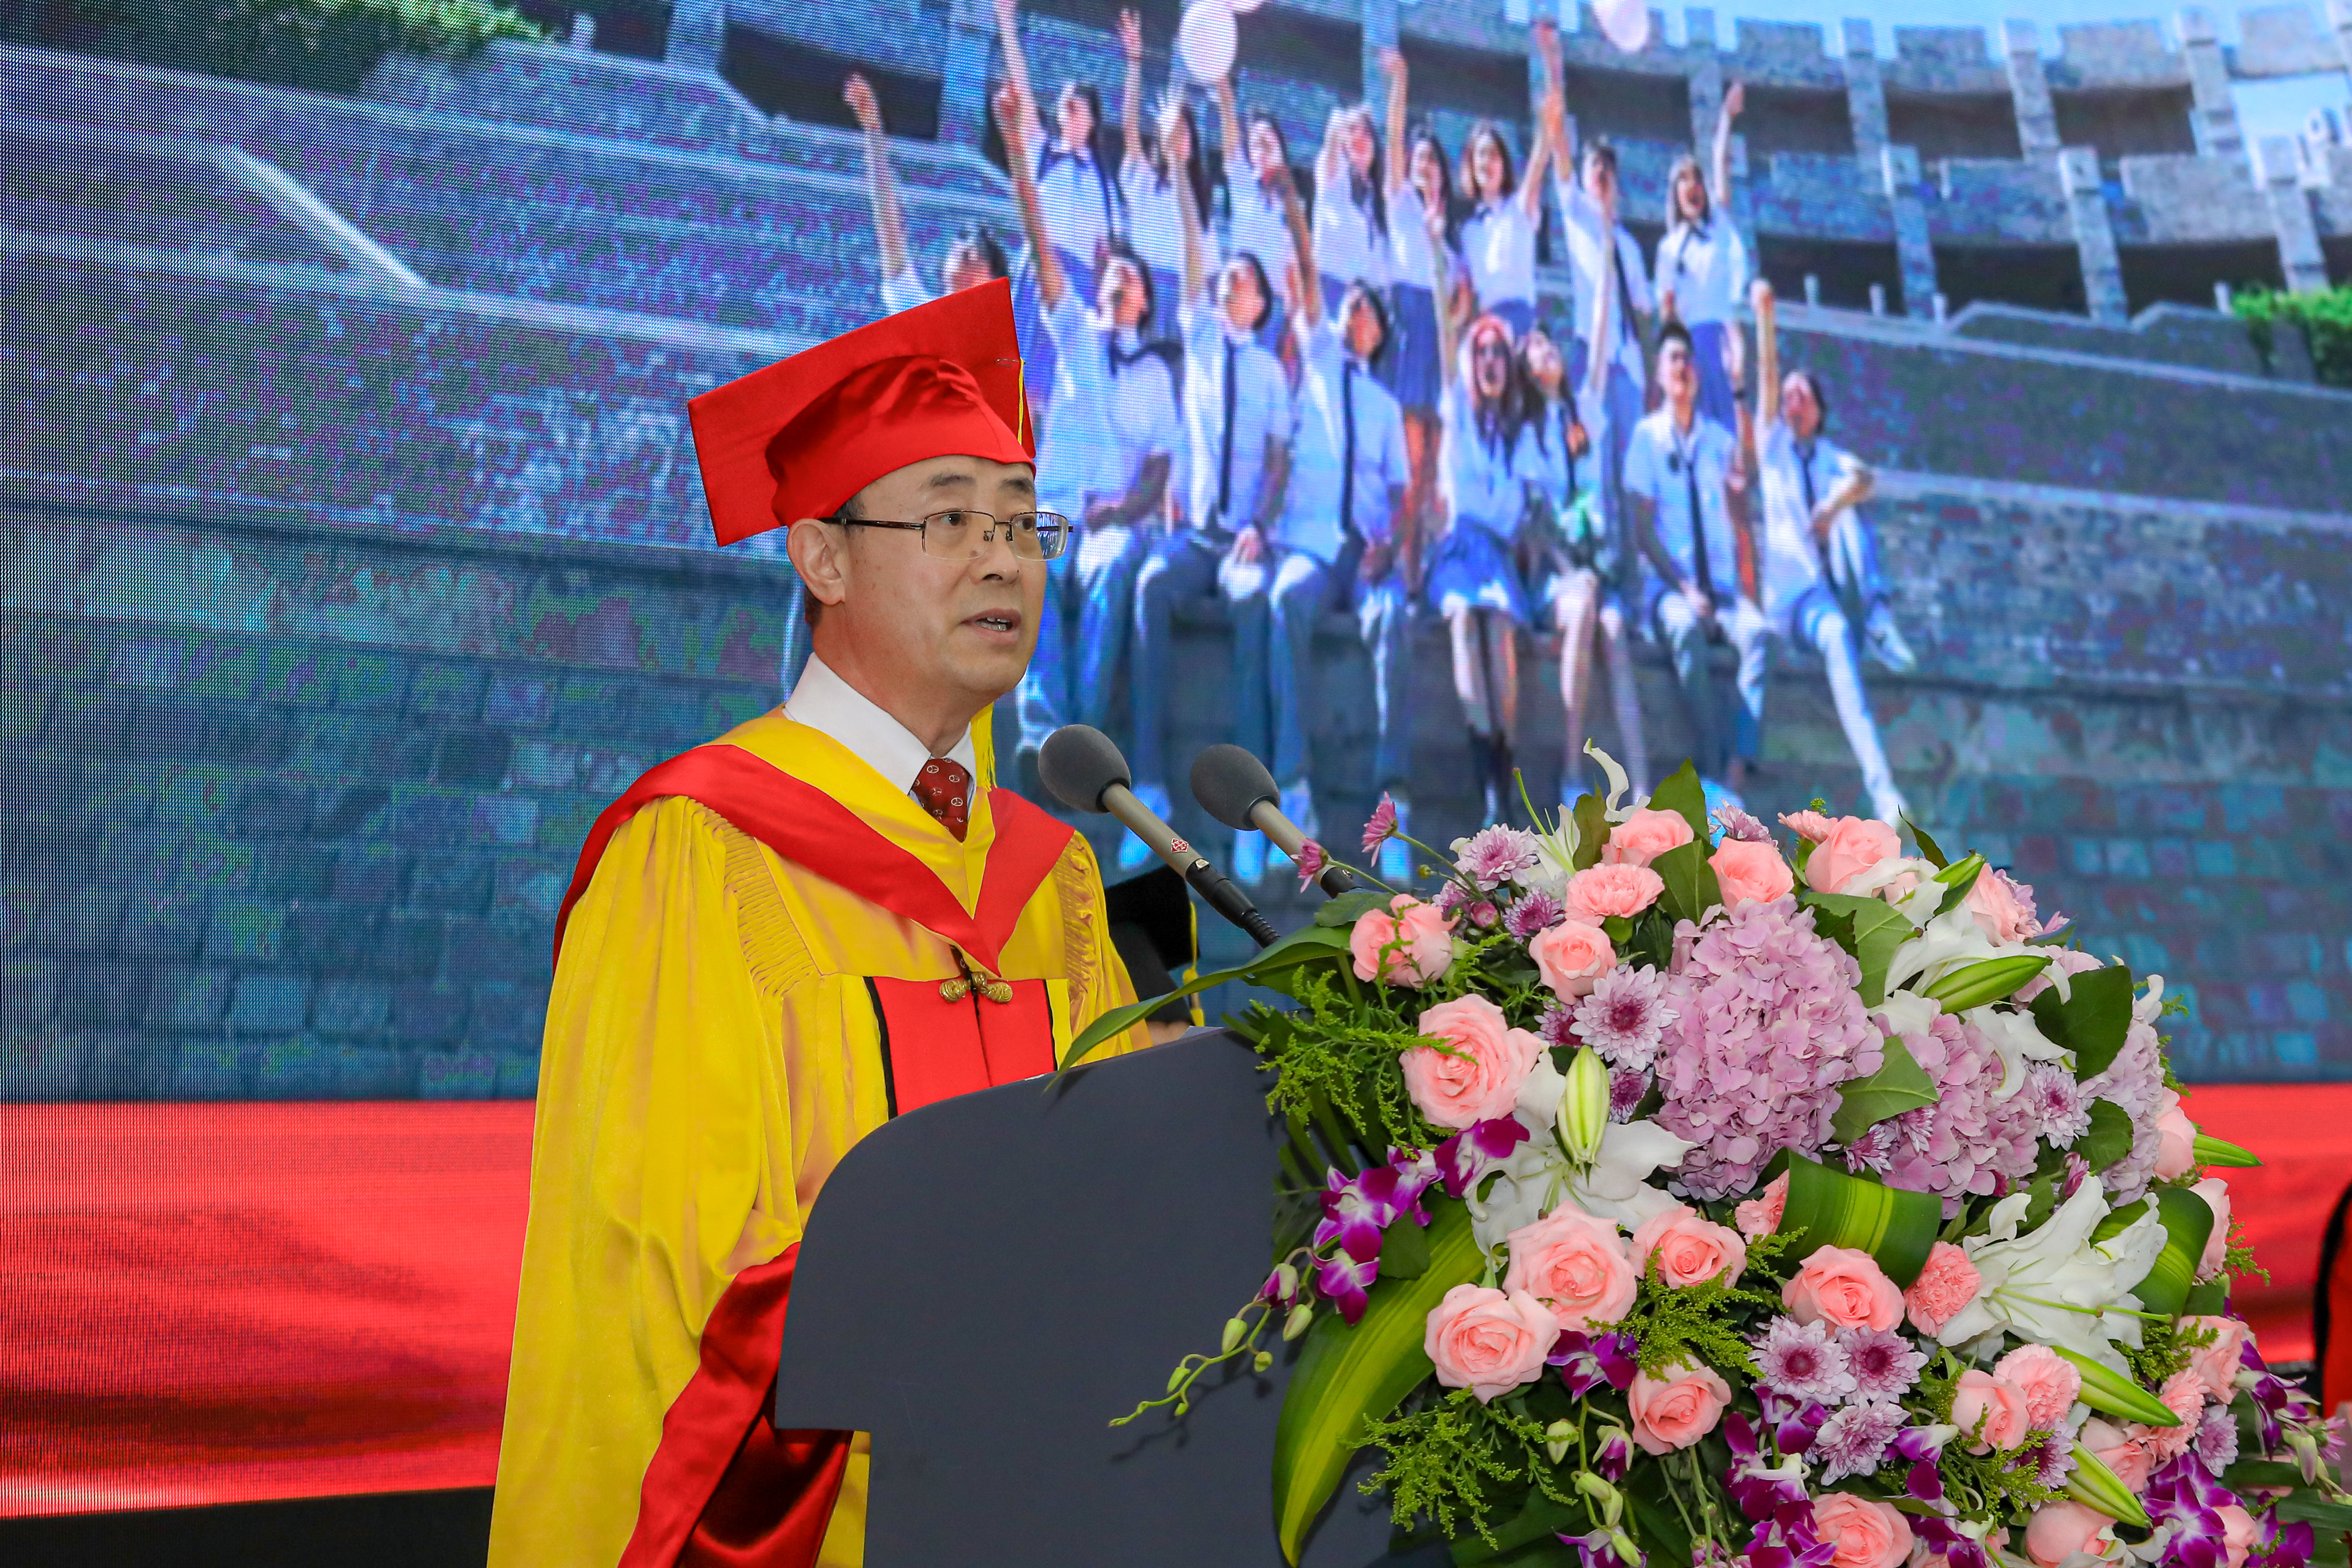 Speech by Wen Tao, Secretary of the Party Committee and President, at the Class 2021 Students Graduation Ceremony and Degree Awarding Ceremony